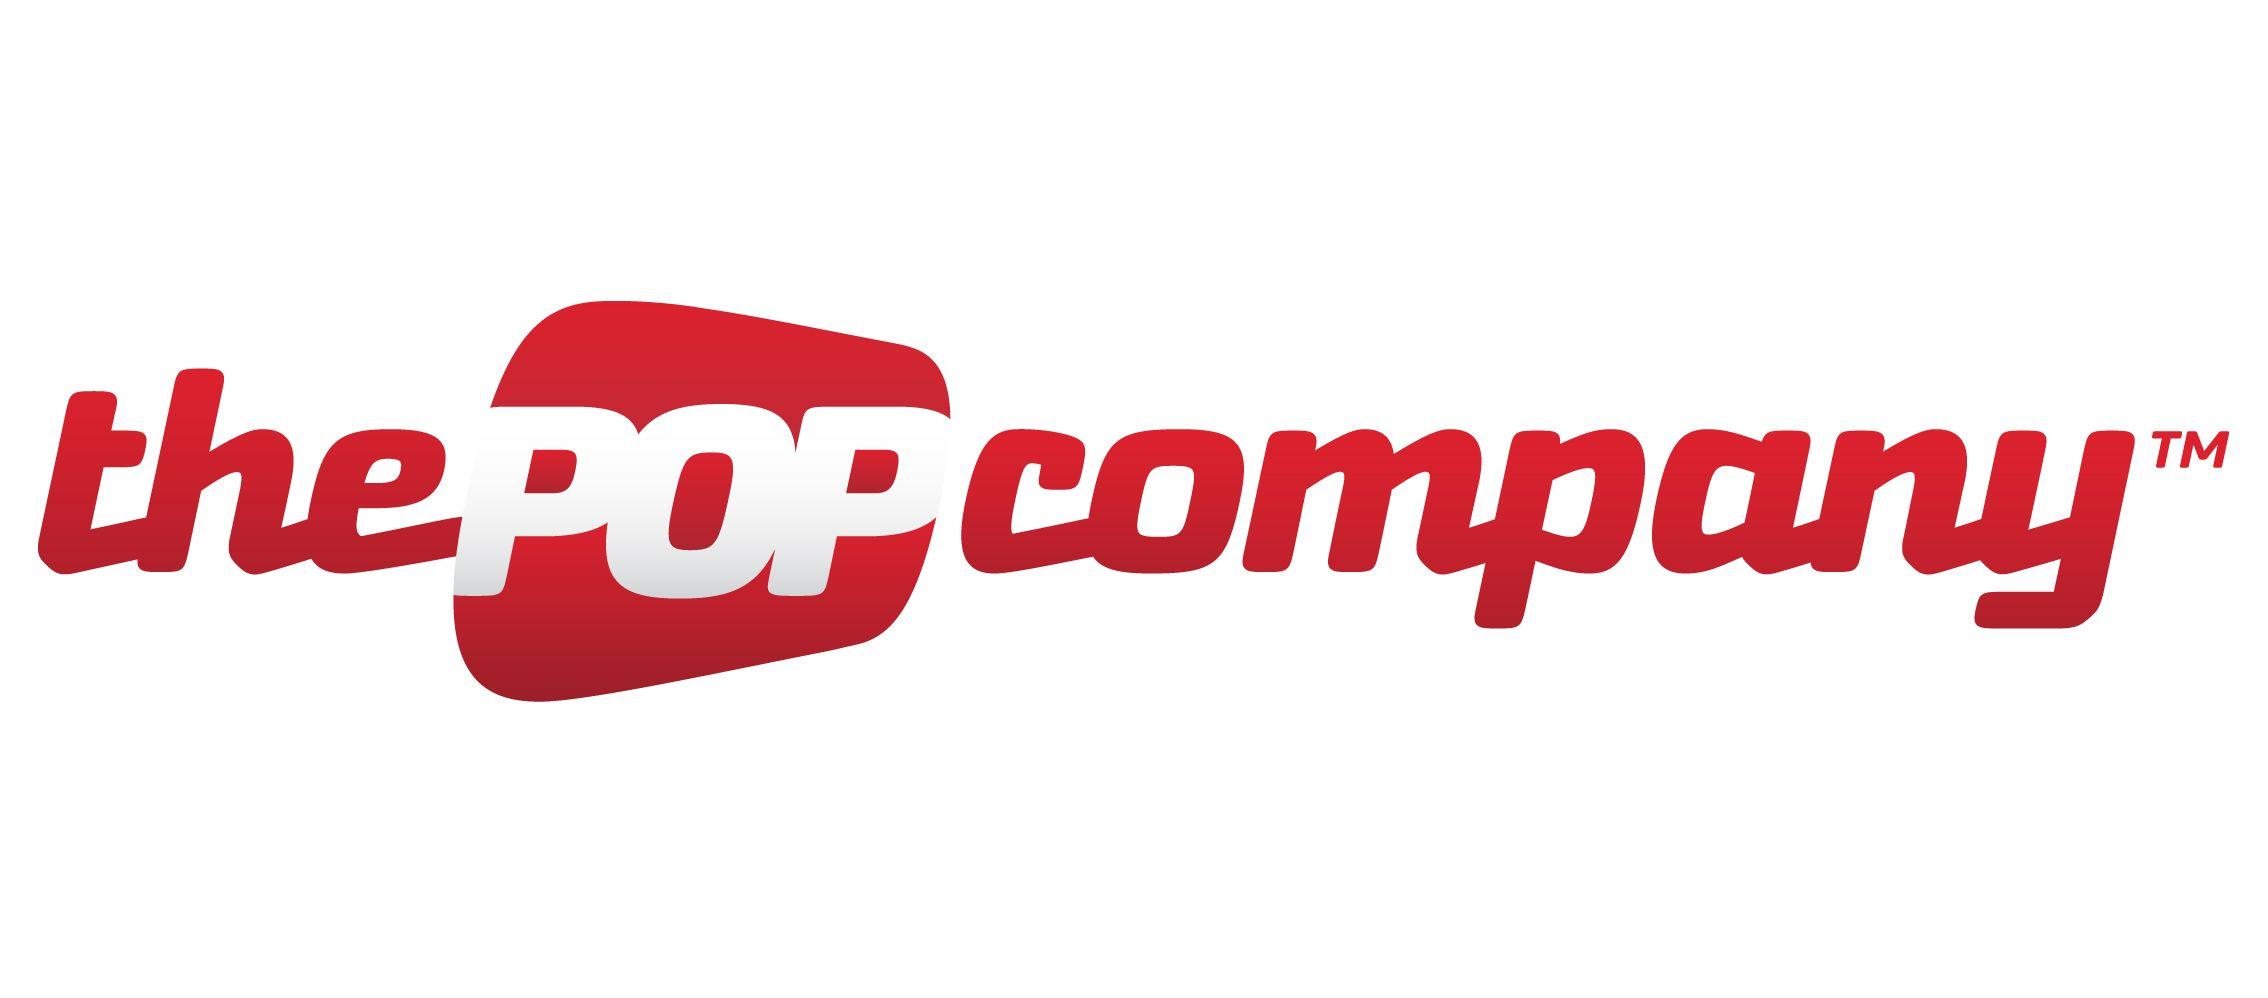 Pop Company Logo - AFS Technologies Acquires The POP Company, a Mobile Sales Force ...